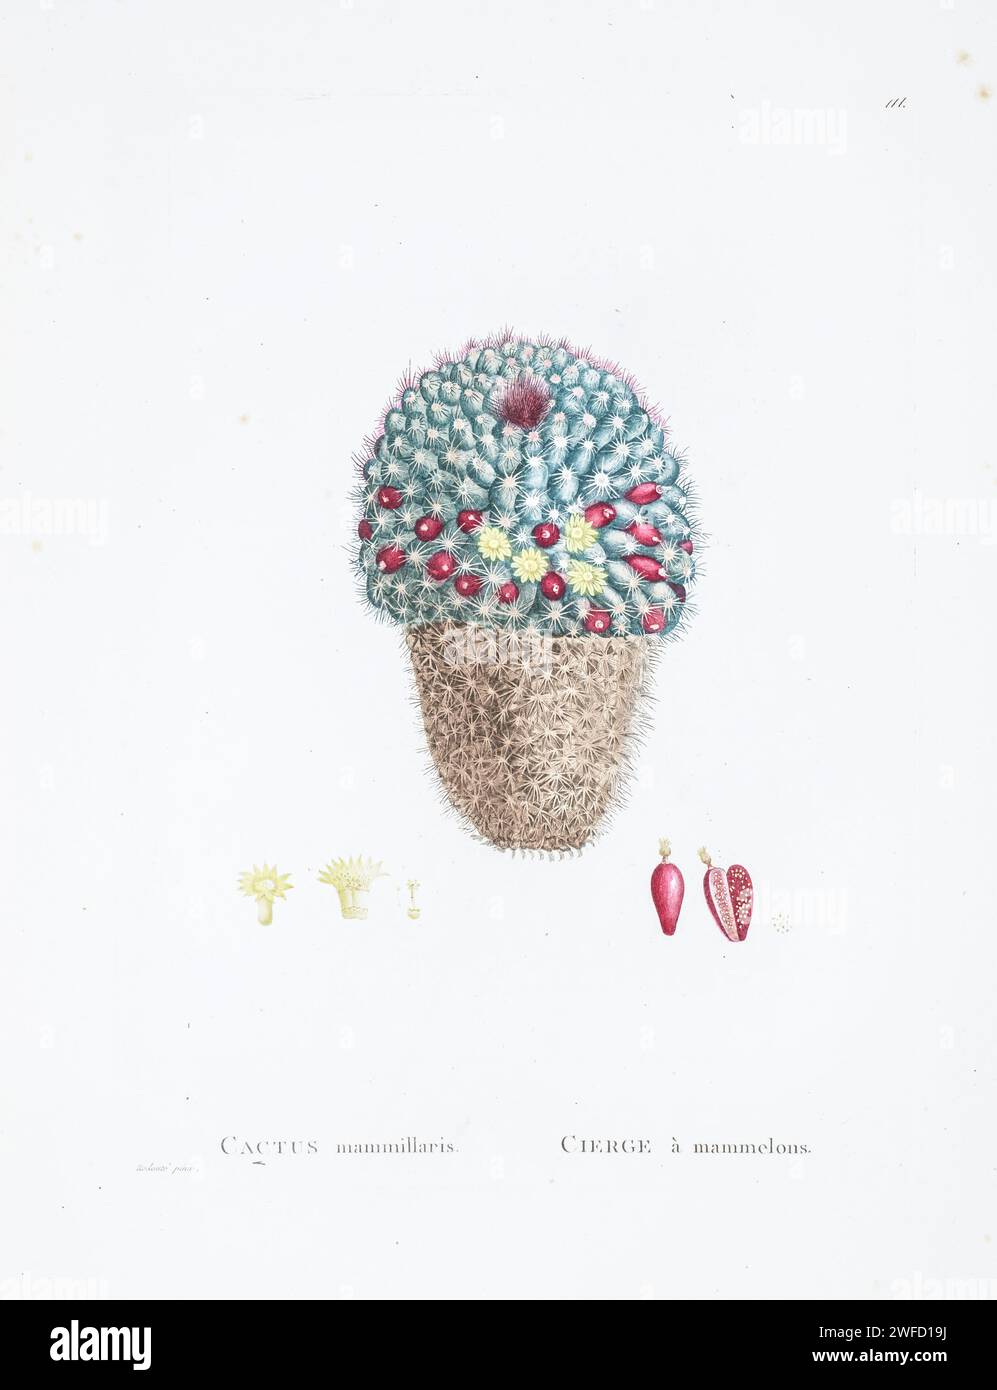 Mammillaria simplex Haw. Here As Cactus mammillaris from History of Succulent Plants [Plantarum historia succulentarum / Histoire des plantes grasses] painted by Pierre-Joseph Redouté and described by Augustin Pyramus de Candolle 1799 Stock Photo